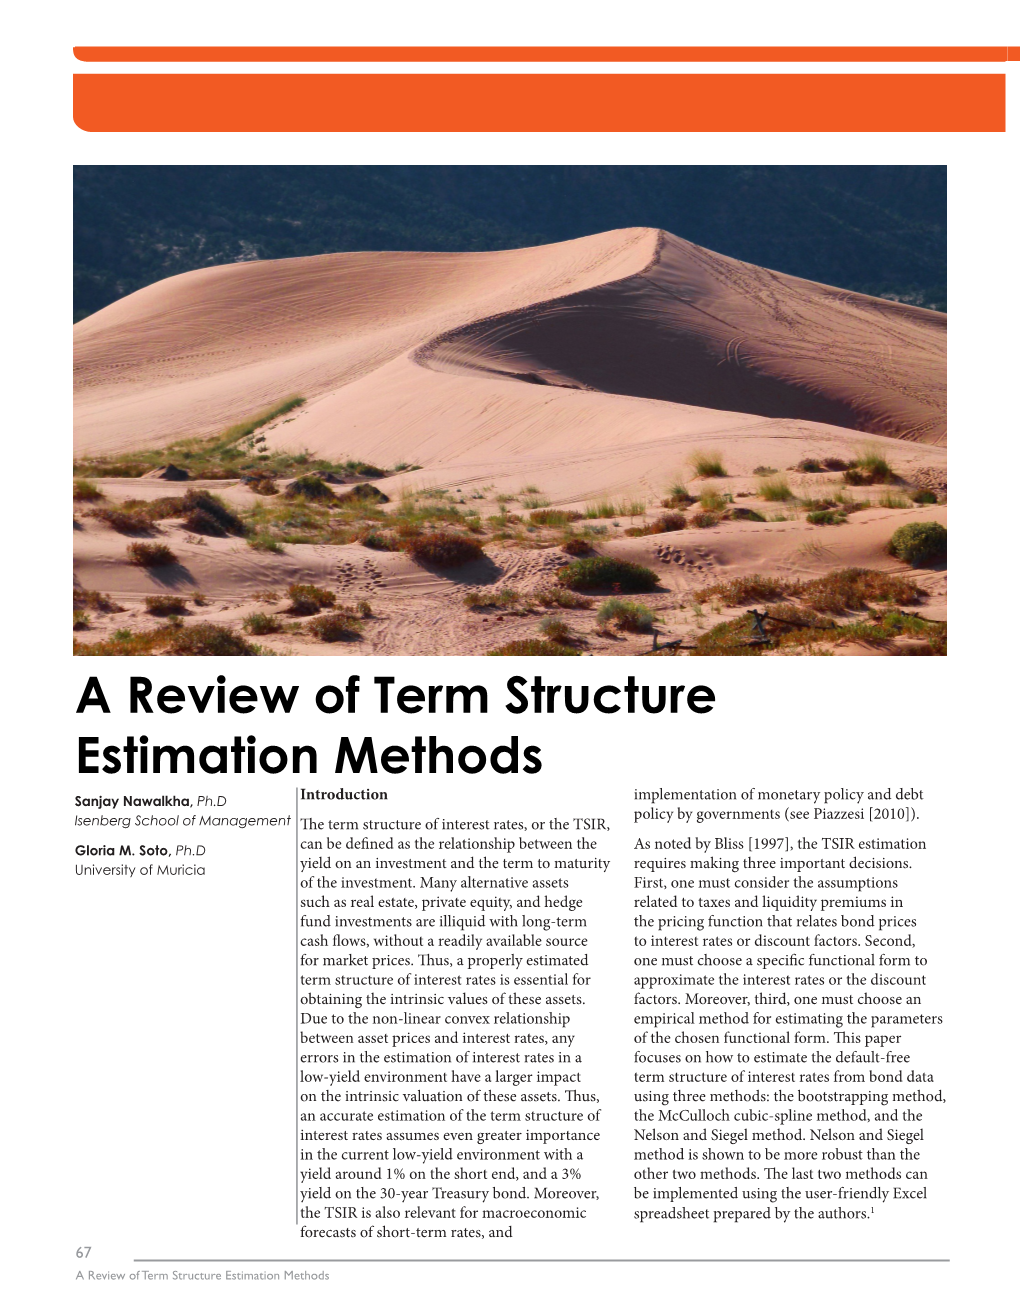 A Review of Term Structure Estimation Methods